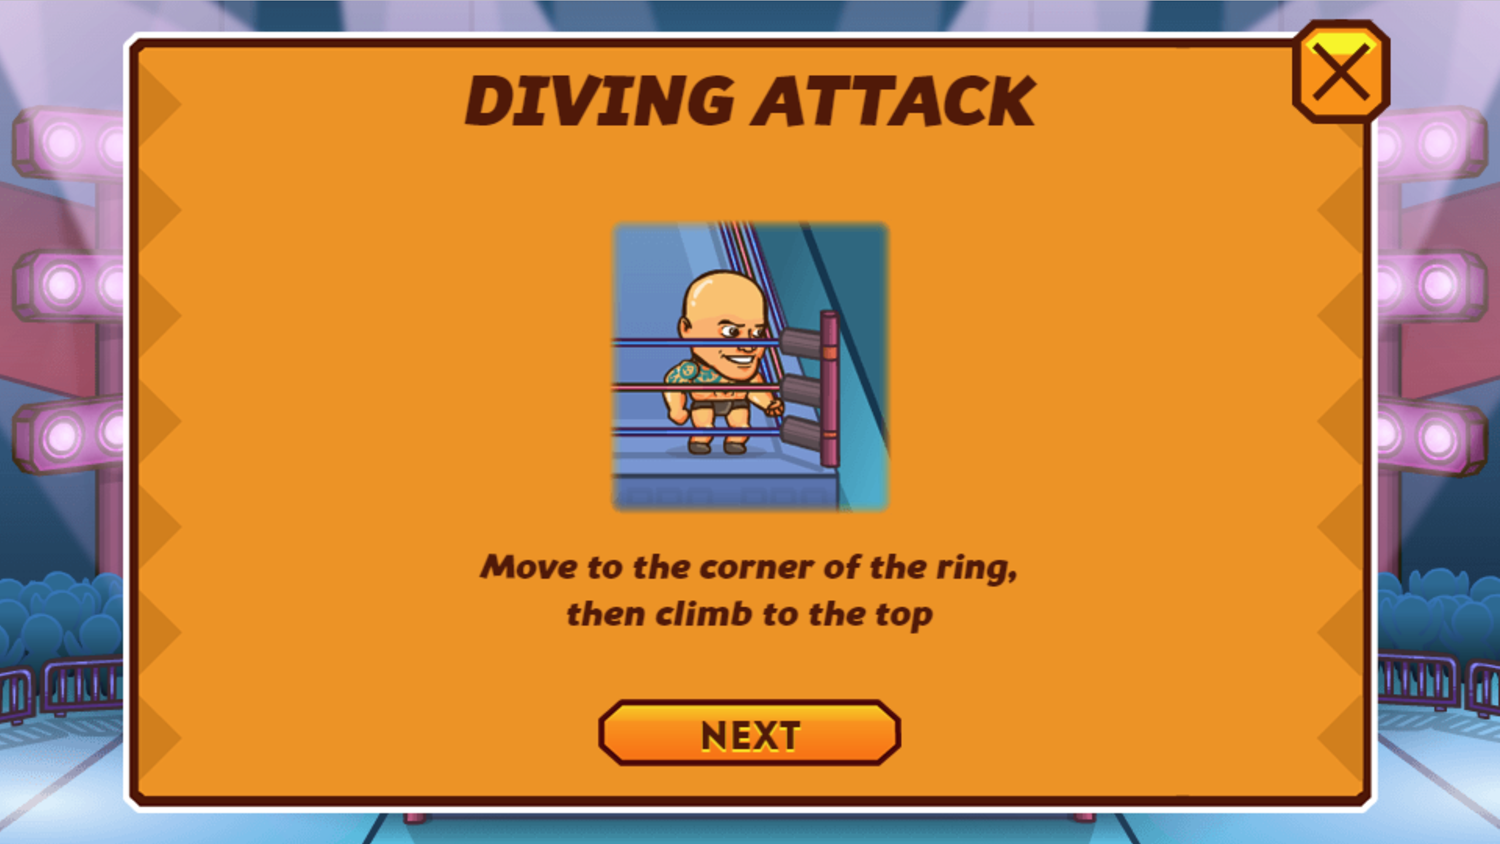 Pro Wrestling Action Game Rope Climbing Instructions Screen Screenshot.